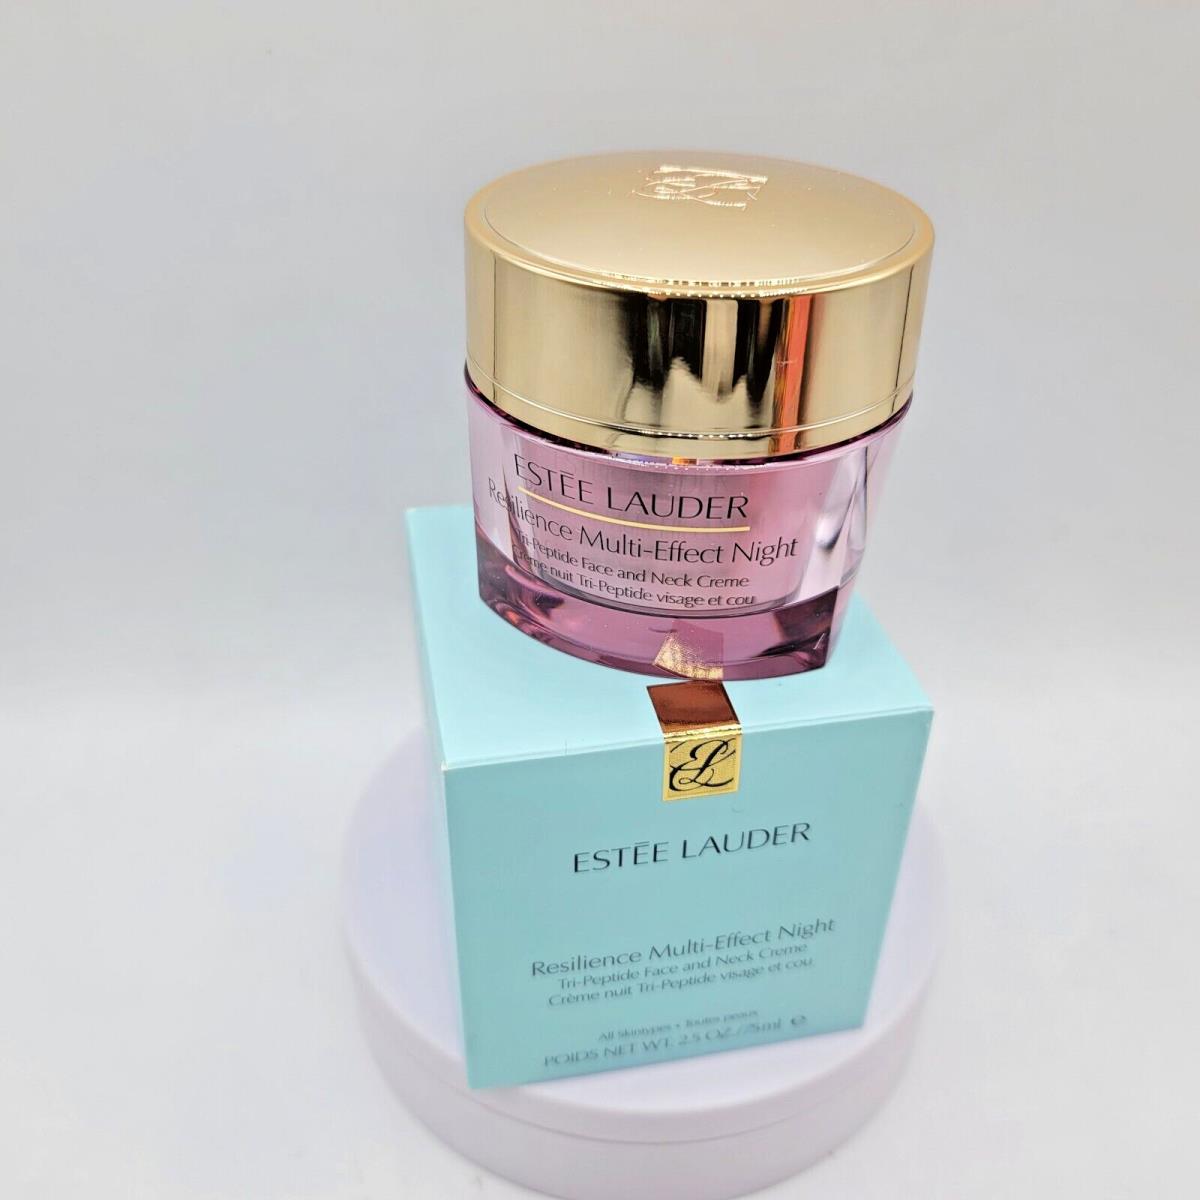 Est e Lauder Resilience Lift Night Lifting Face and Neck Creme - 2.5oz